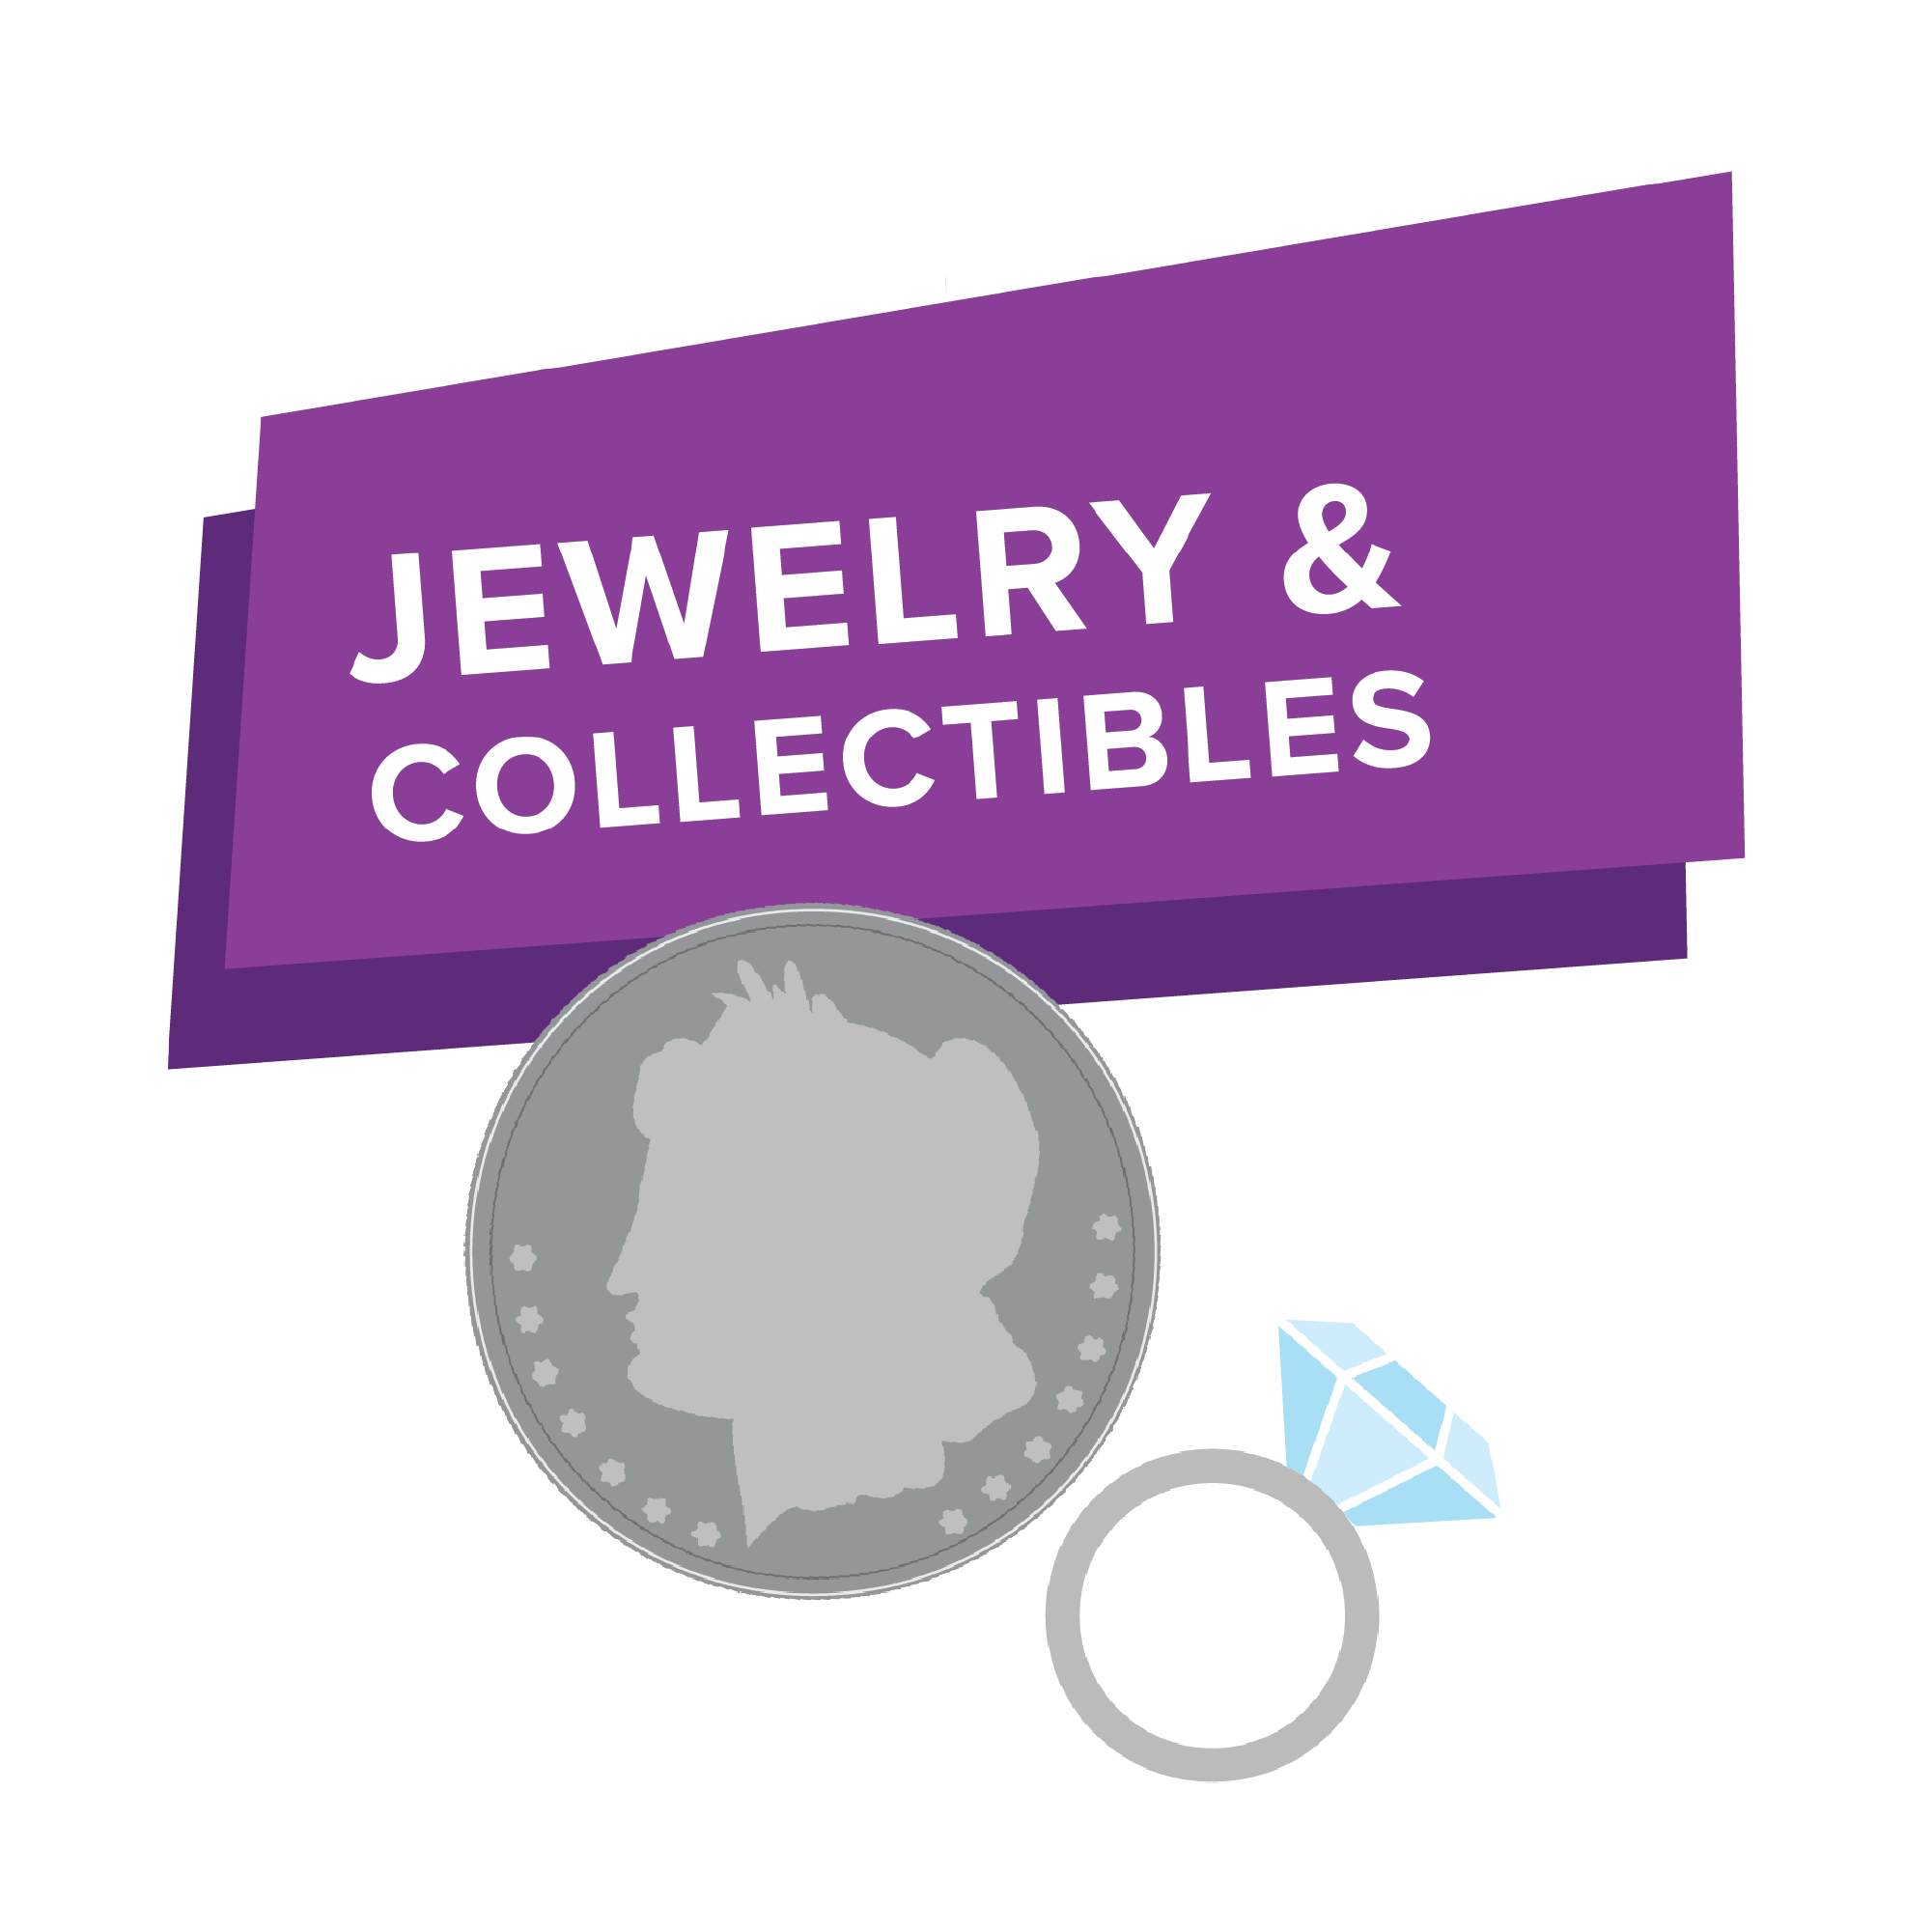 Coins, Jewelry, Luxury Goods & Collectibles